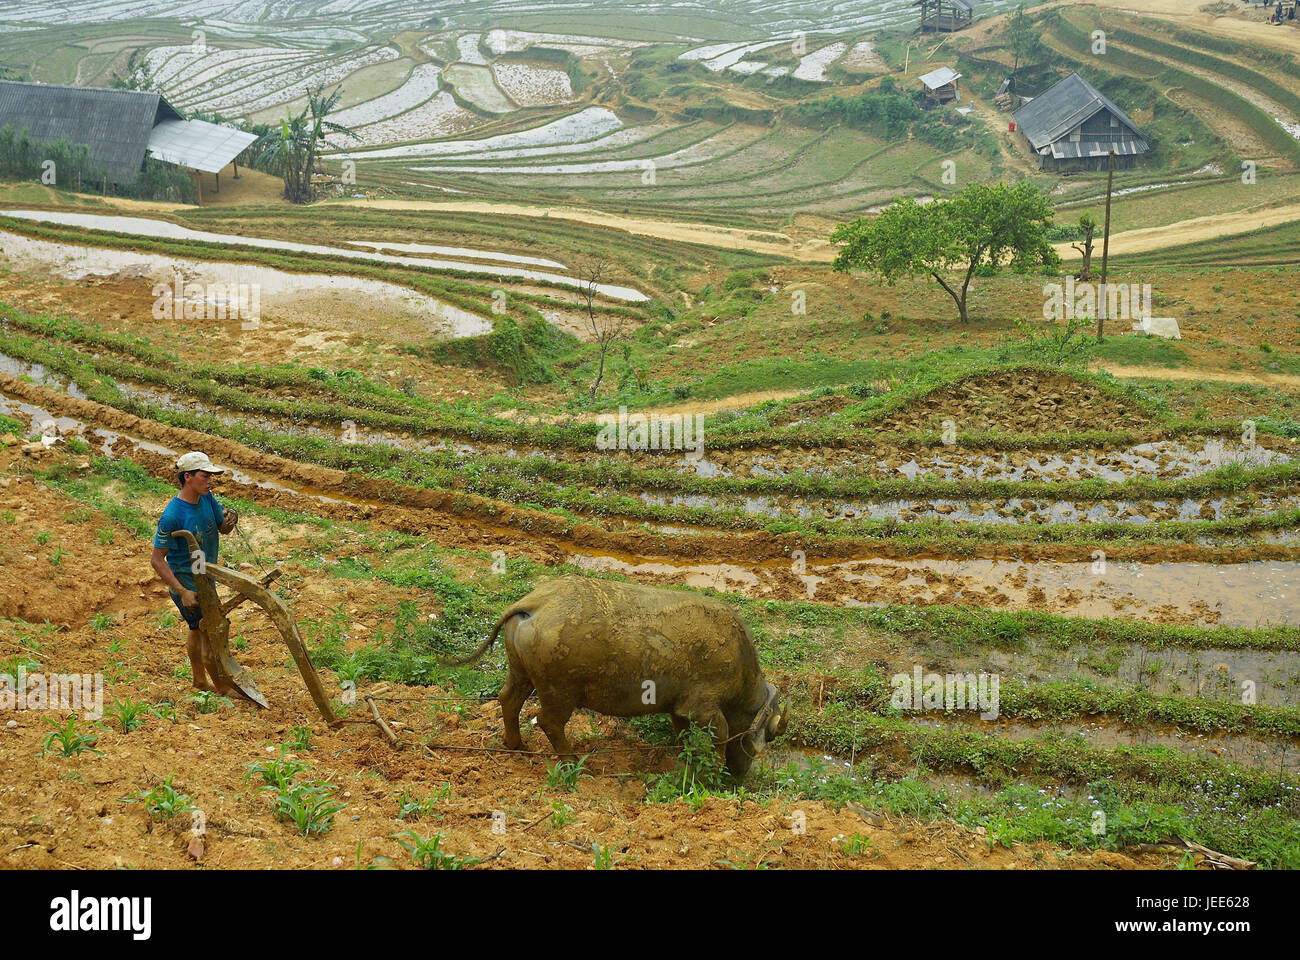 Asia, Vietnam, agricultural laborer ploughs a rice field, Stock Photo